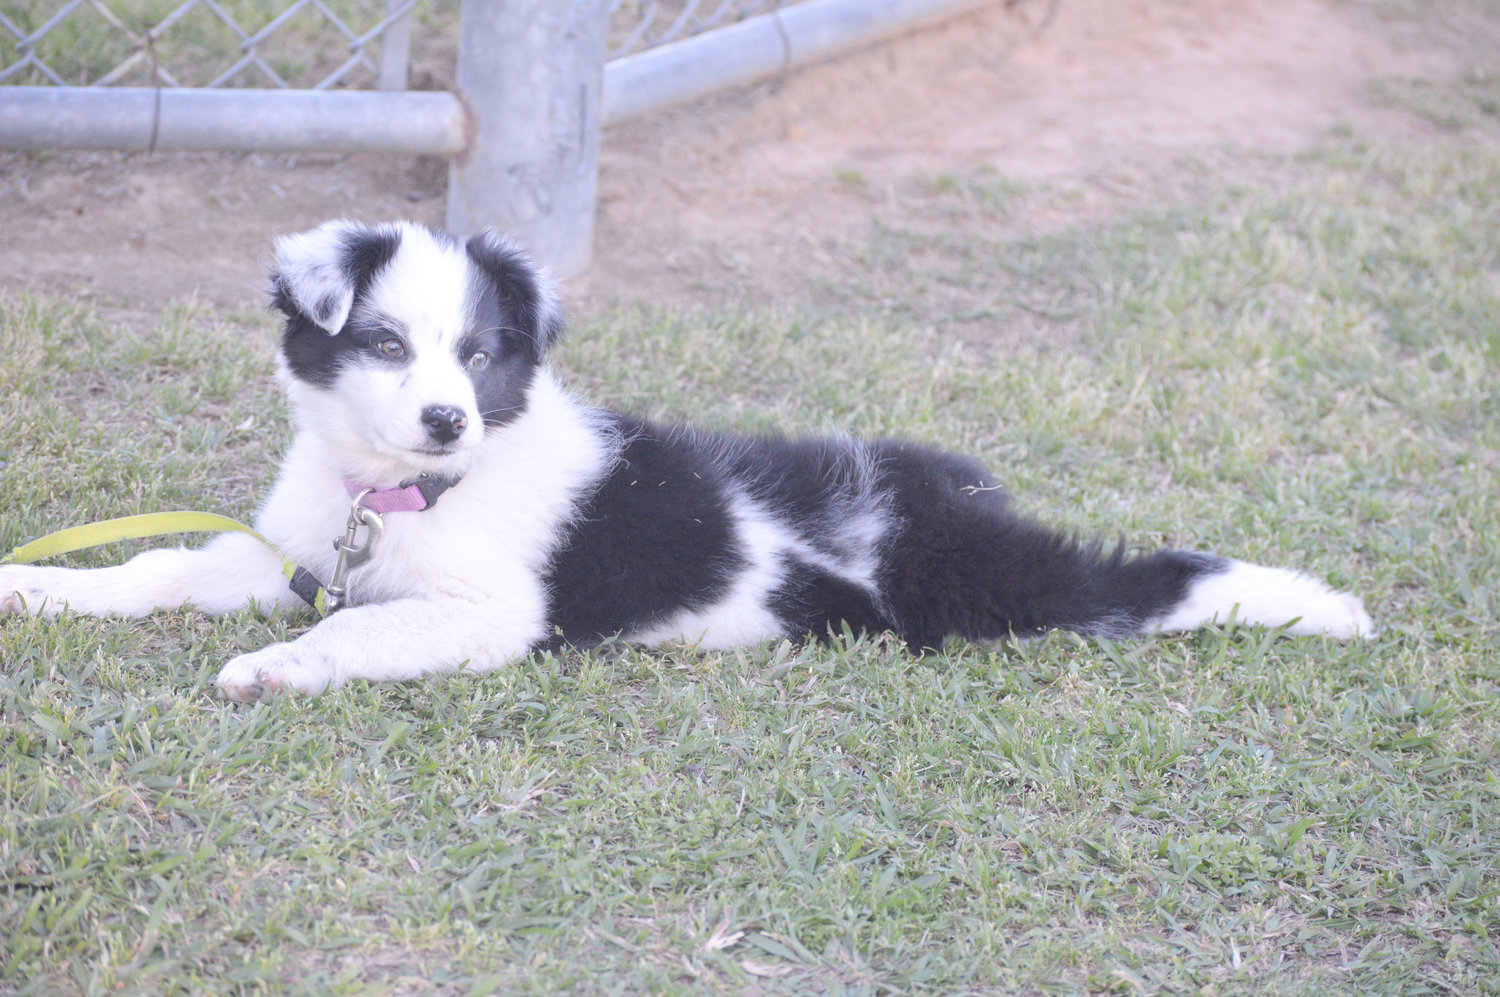 Panda the puppy enjoys coming to Quitman baseball games to take in all the action.